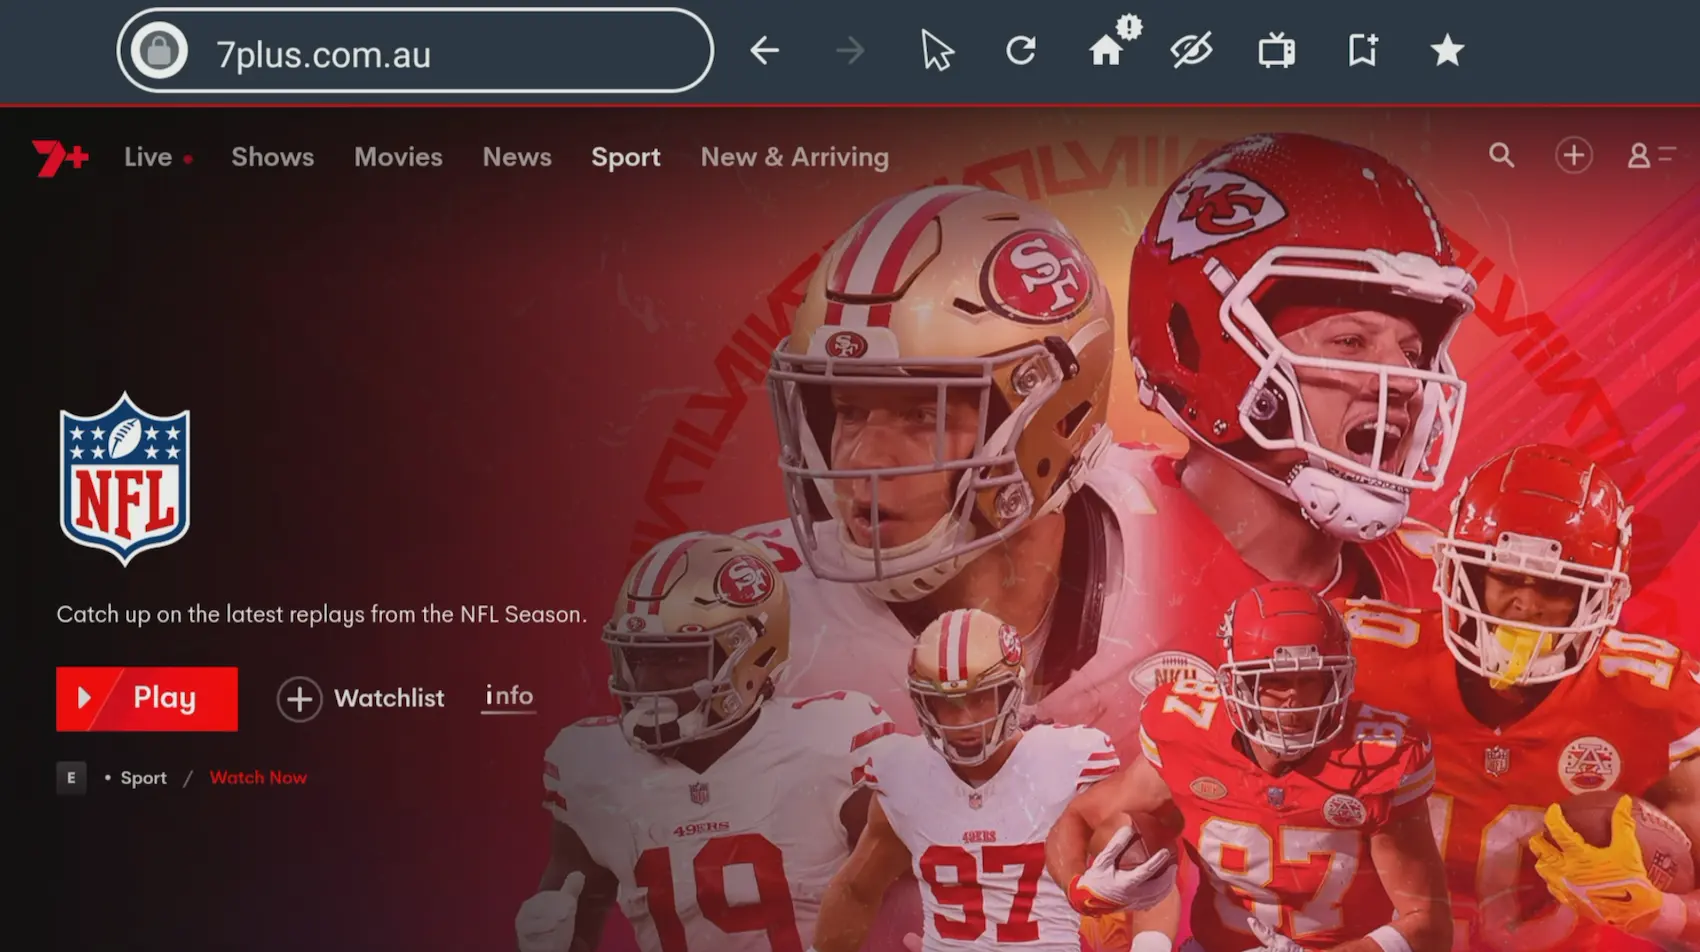 NFL content on 7plus.com.au, being accessed through the built-in Silk browser on Fire TV. Featuring a collage of San Francisco 49ers and Kansas City Chiefs football players in action poses, with a focus on the quarterbacks in the center. The NFL logo is displayed prominently.